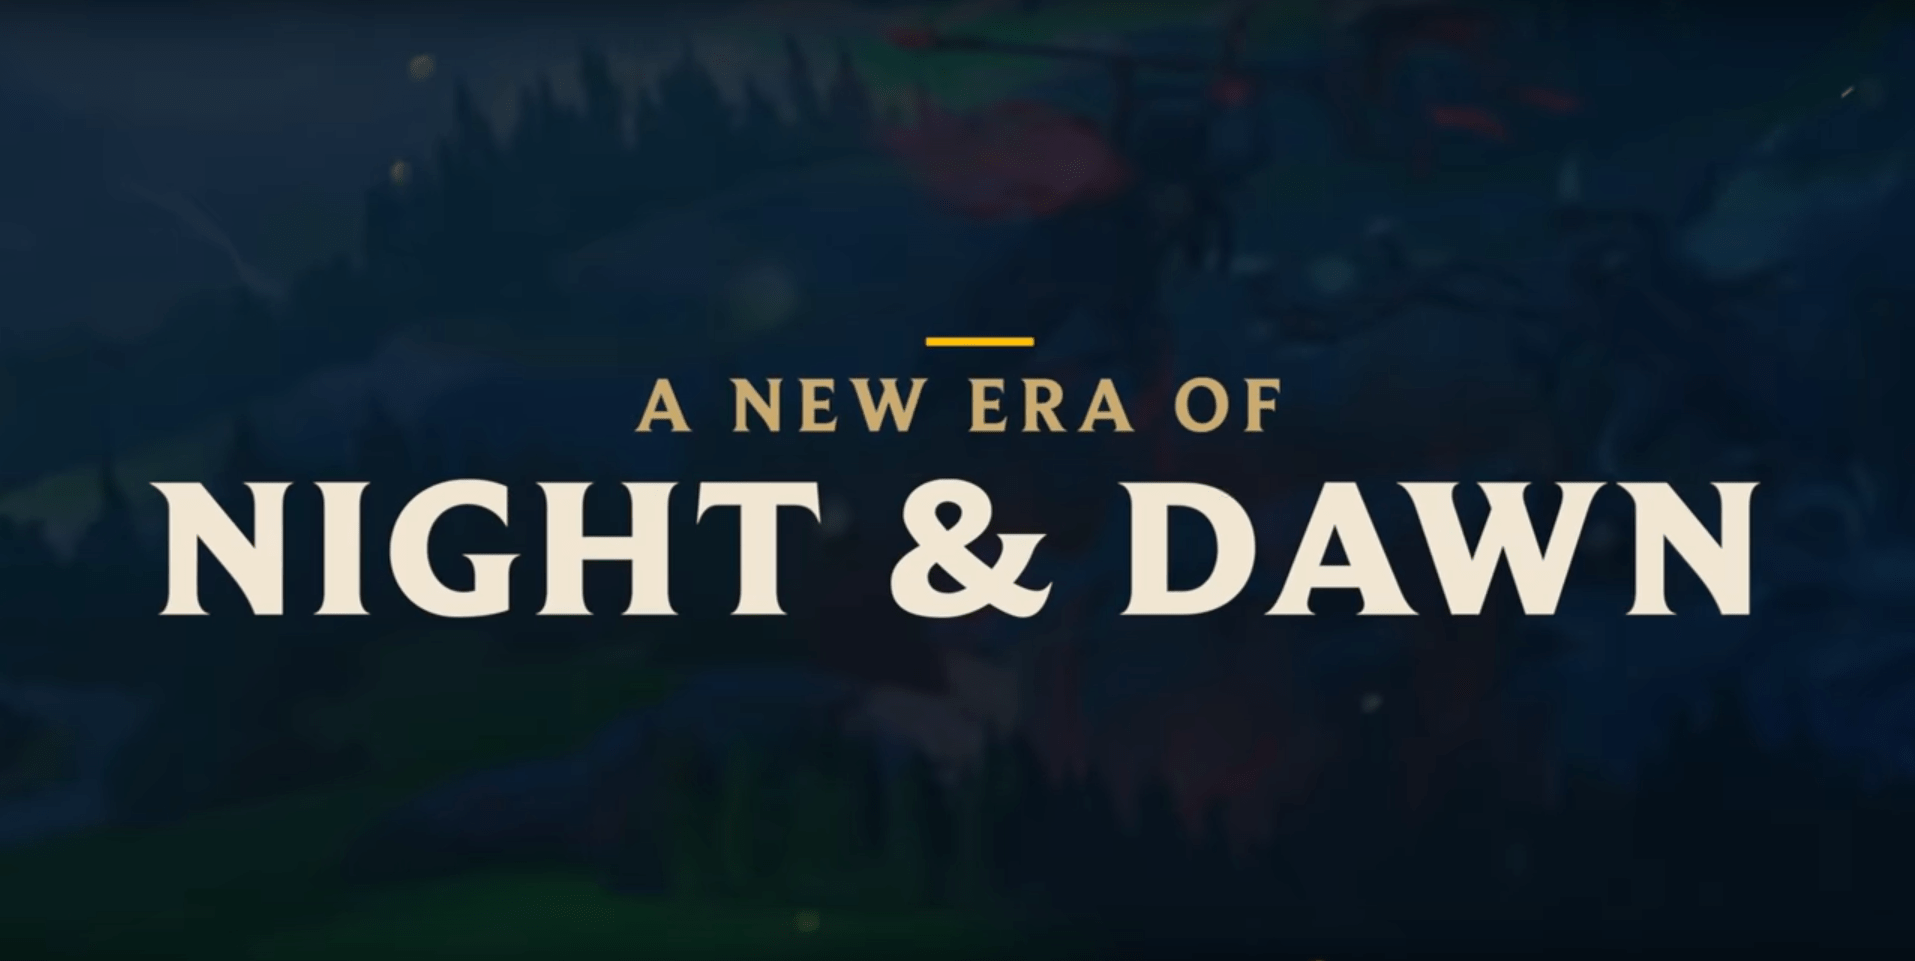 League of Legends Begins New “Night & Dawn” Event, Active Until January